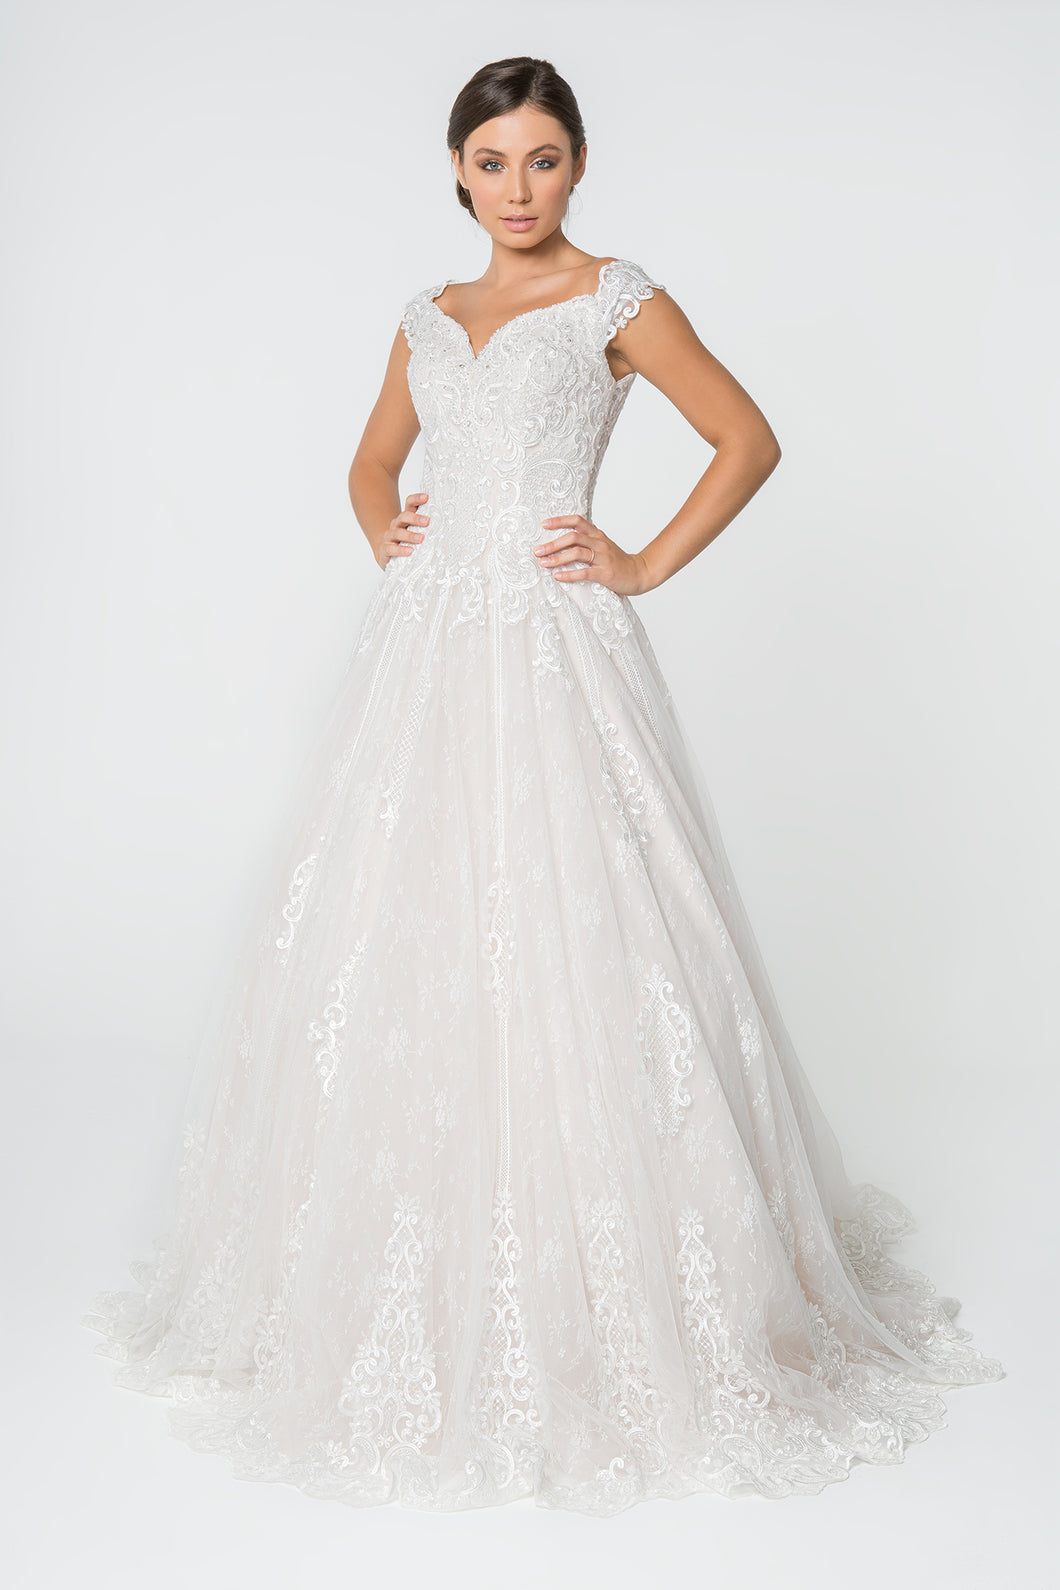 Poppy Wedding Dress Off Shoulder Lace Skirt Bridal Gown 2602823HER SAMPLE IN STORE